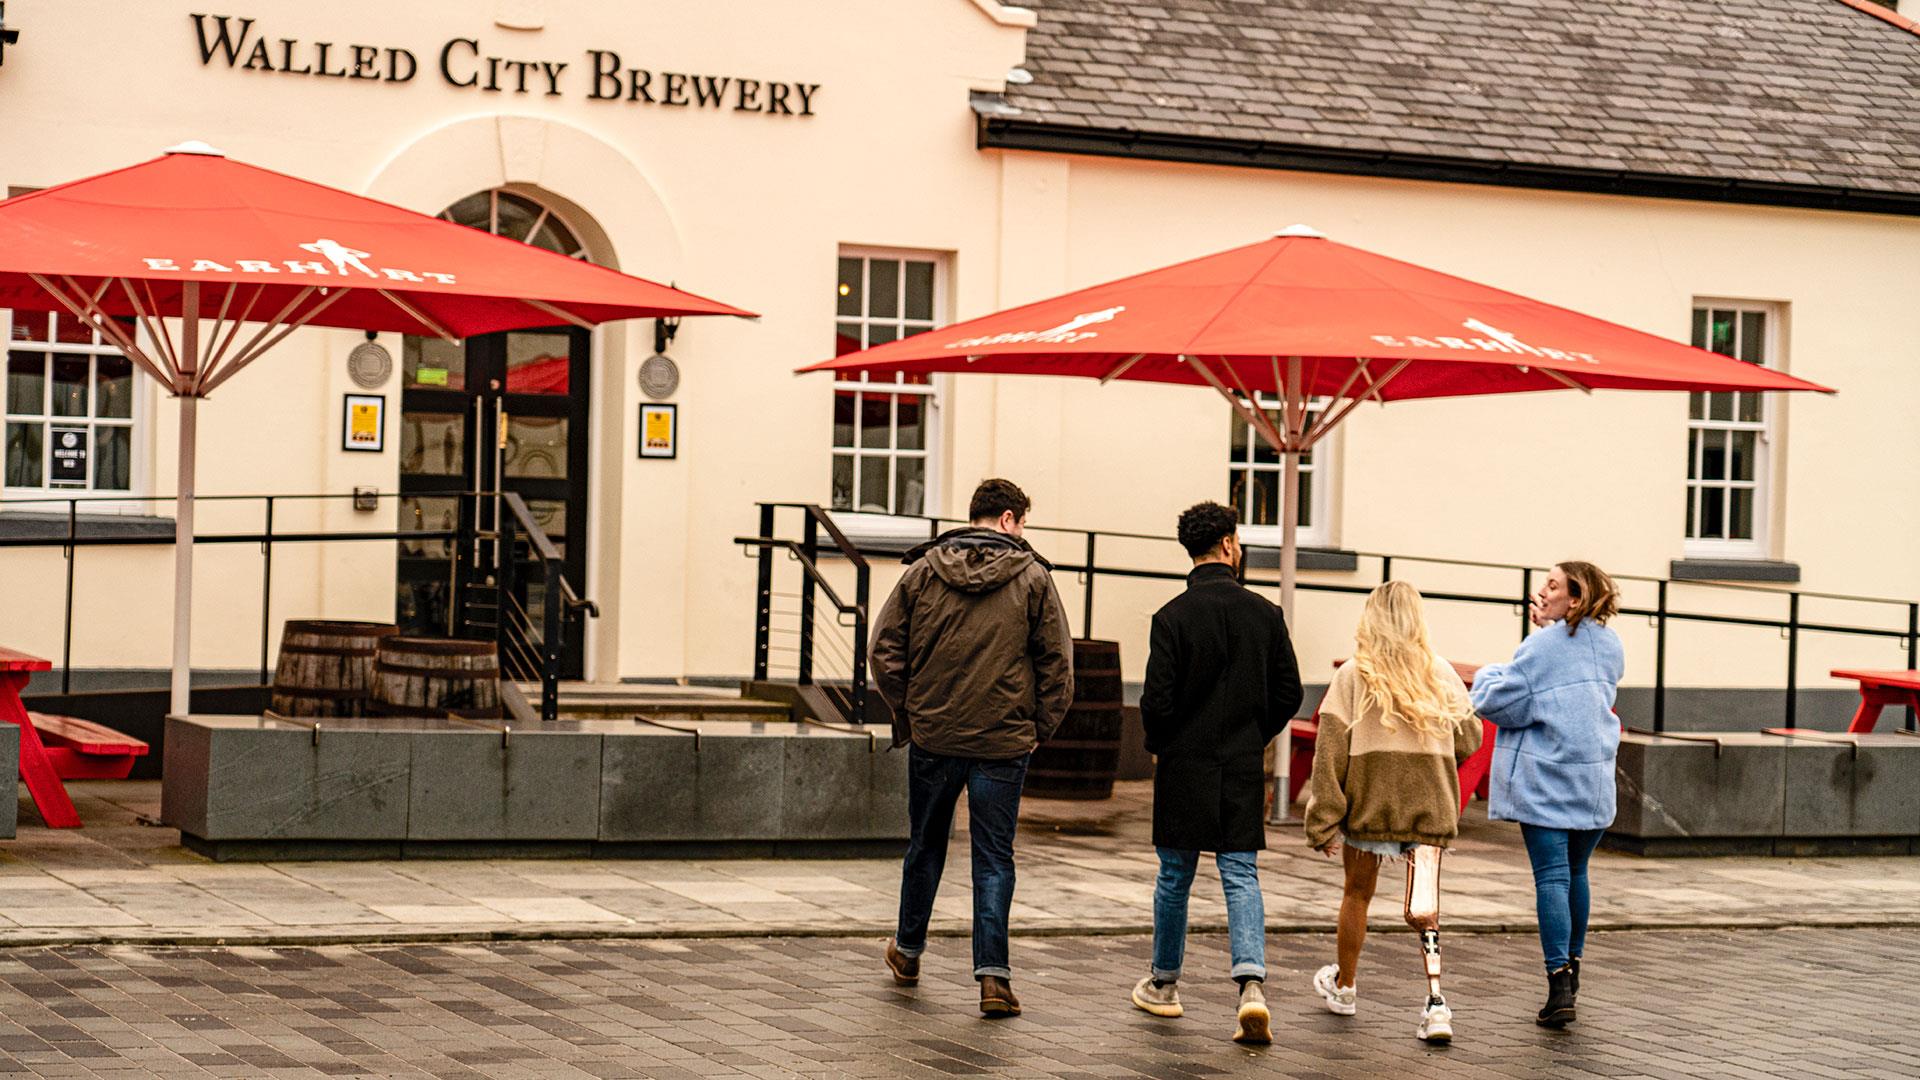 Group arriving at the Walled City Brewery in Derry~Londondonderry to start the Beer Masterclass